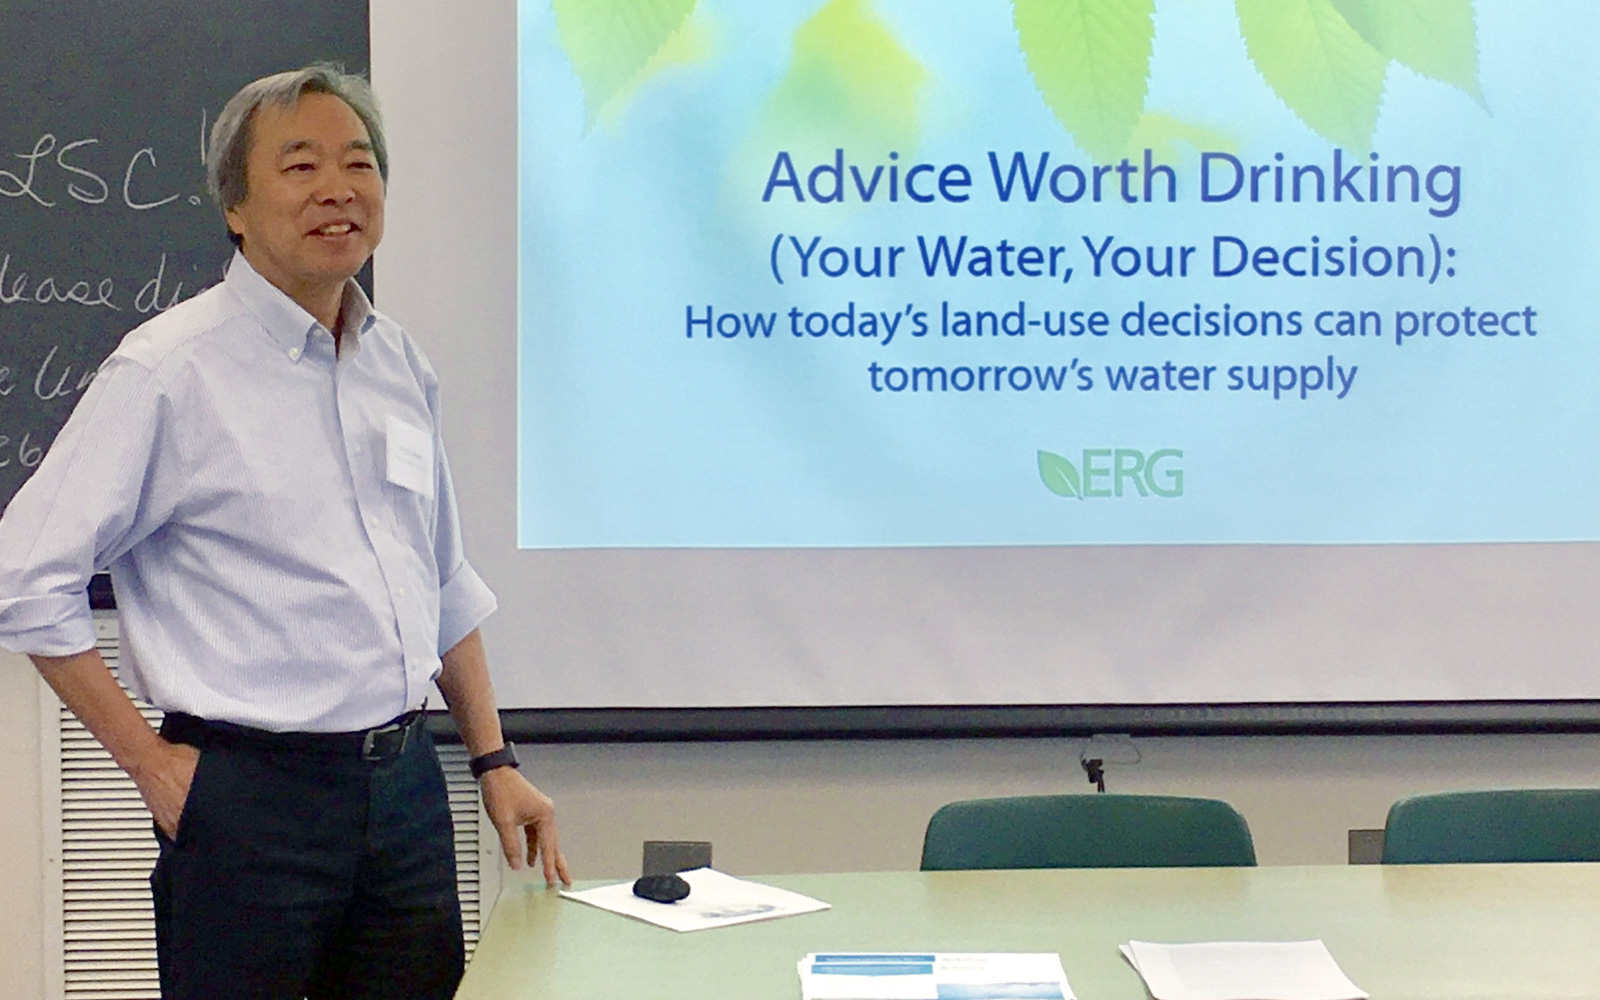 Photo of ERG’s Chi Ho Sham, making a presentation titled “Advice Worth Drinking (Your Water, Your Decision): How today’s land-use decisions can protect tomorrow’s water supply”